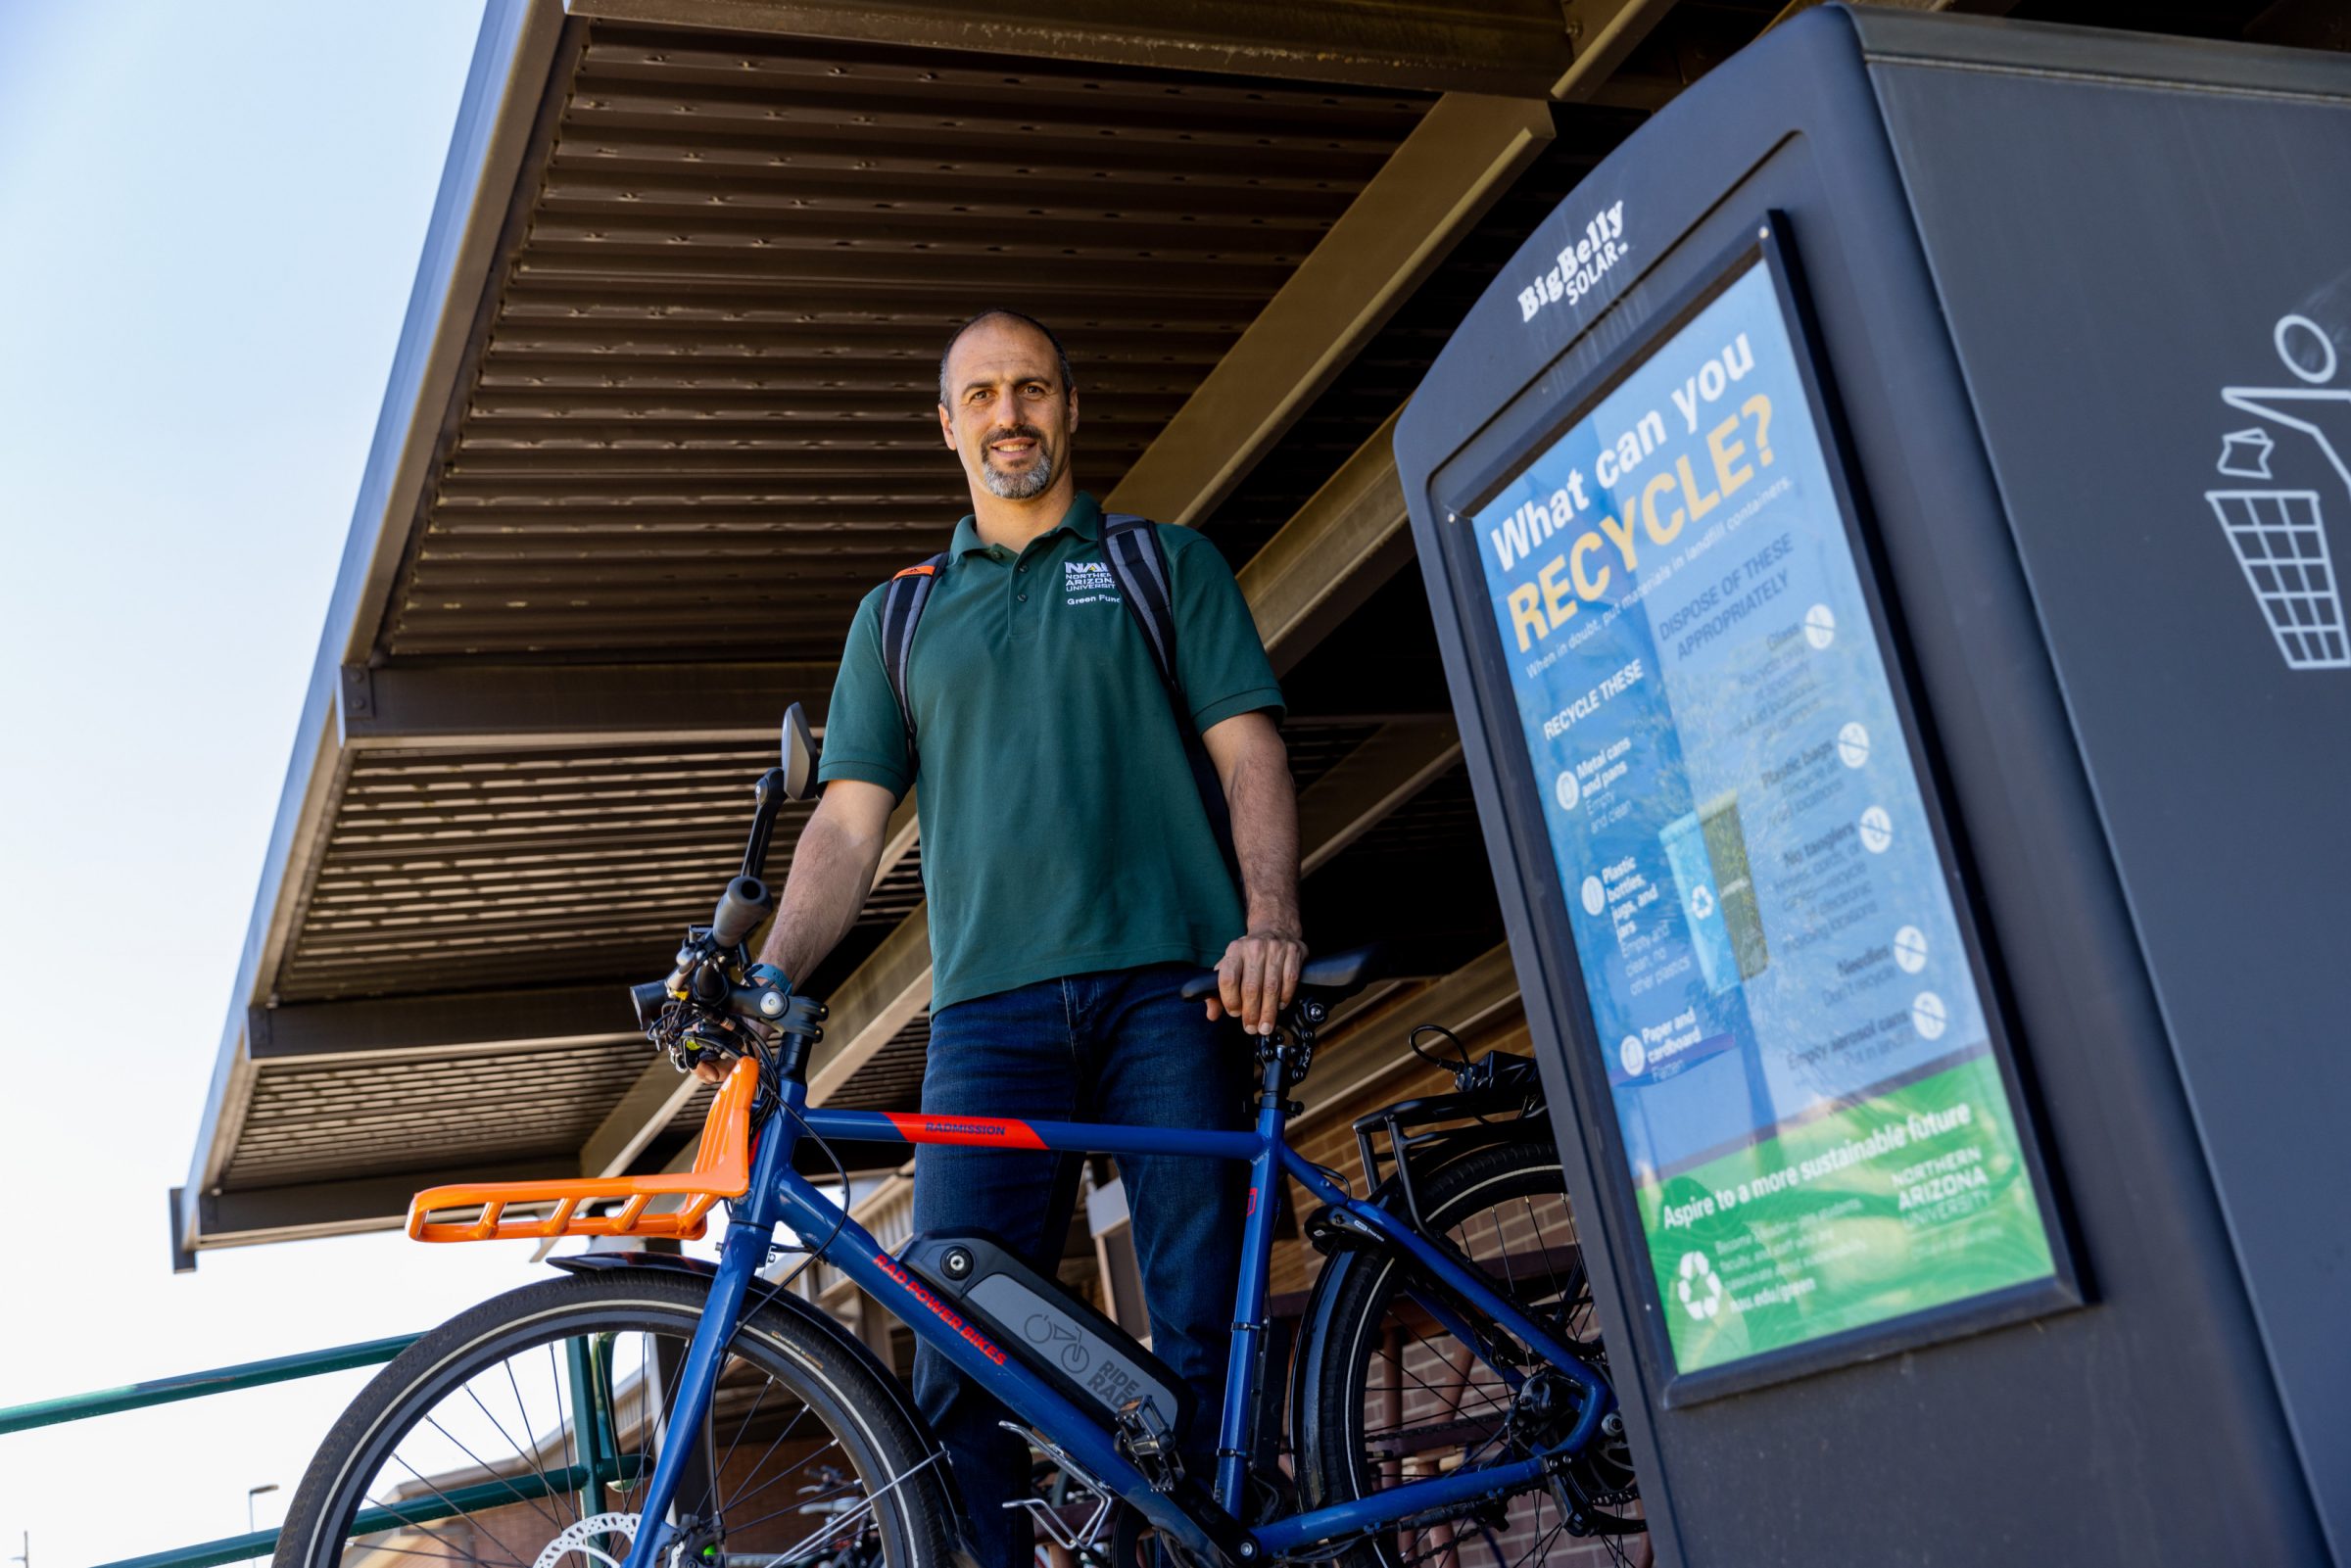 The manager of sustainability, Avi Henn stands by a recycling bin with a bike.